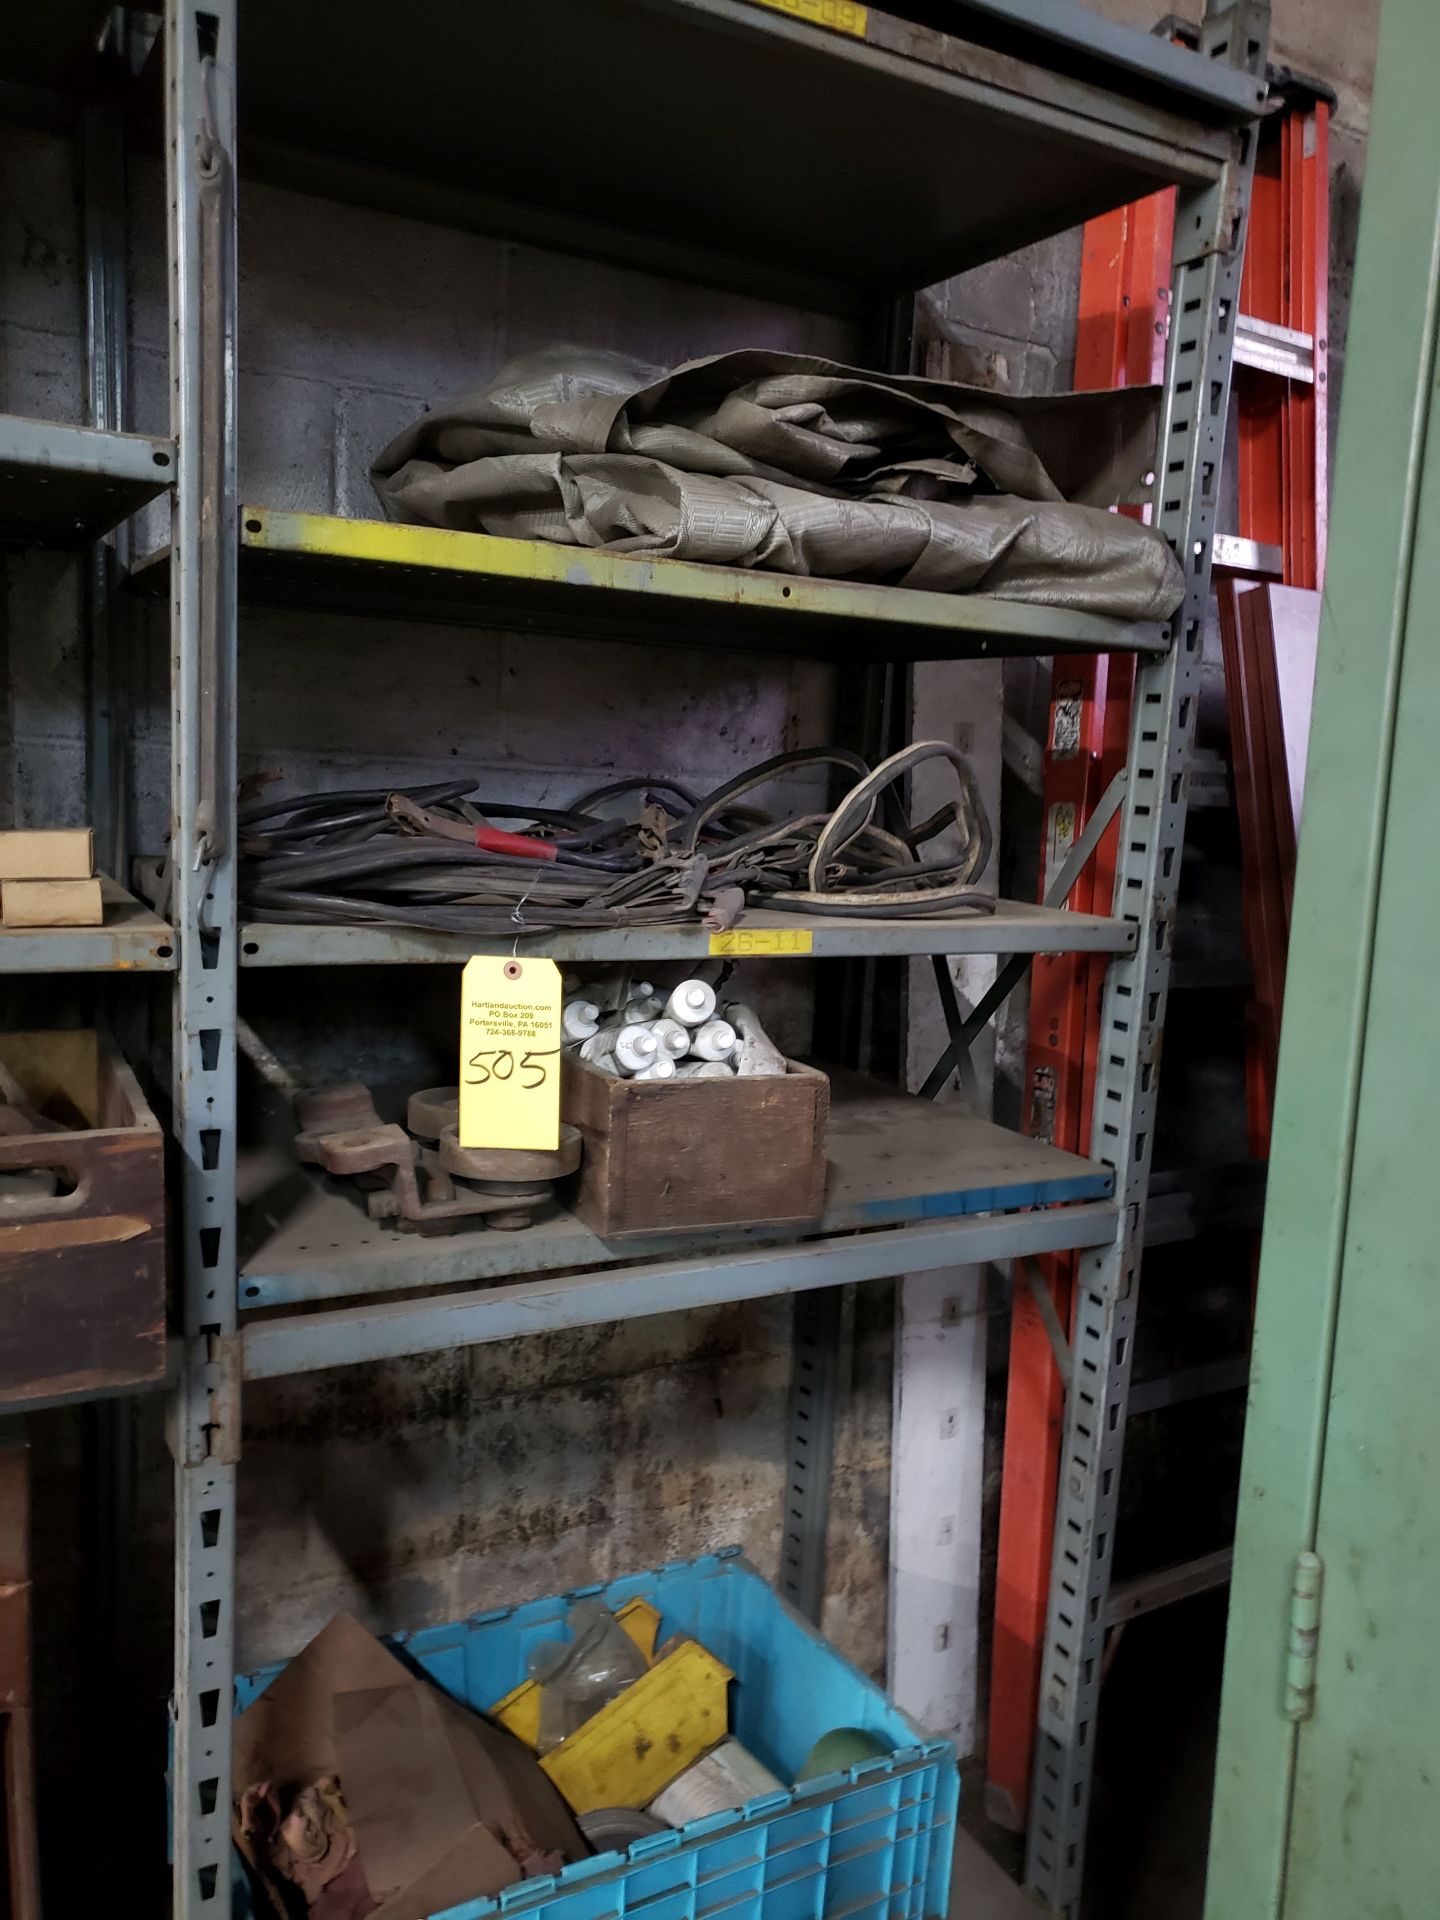 CONTENTS OF 1 SECTION OF SHELVES